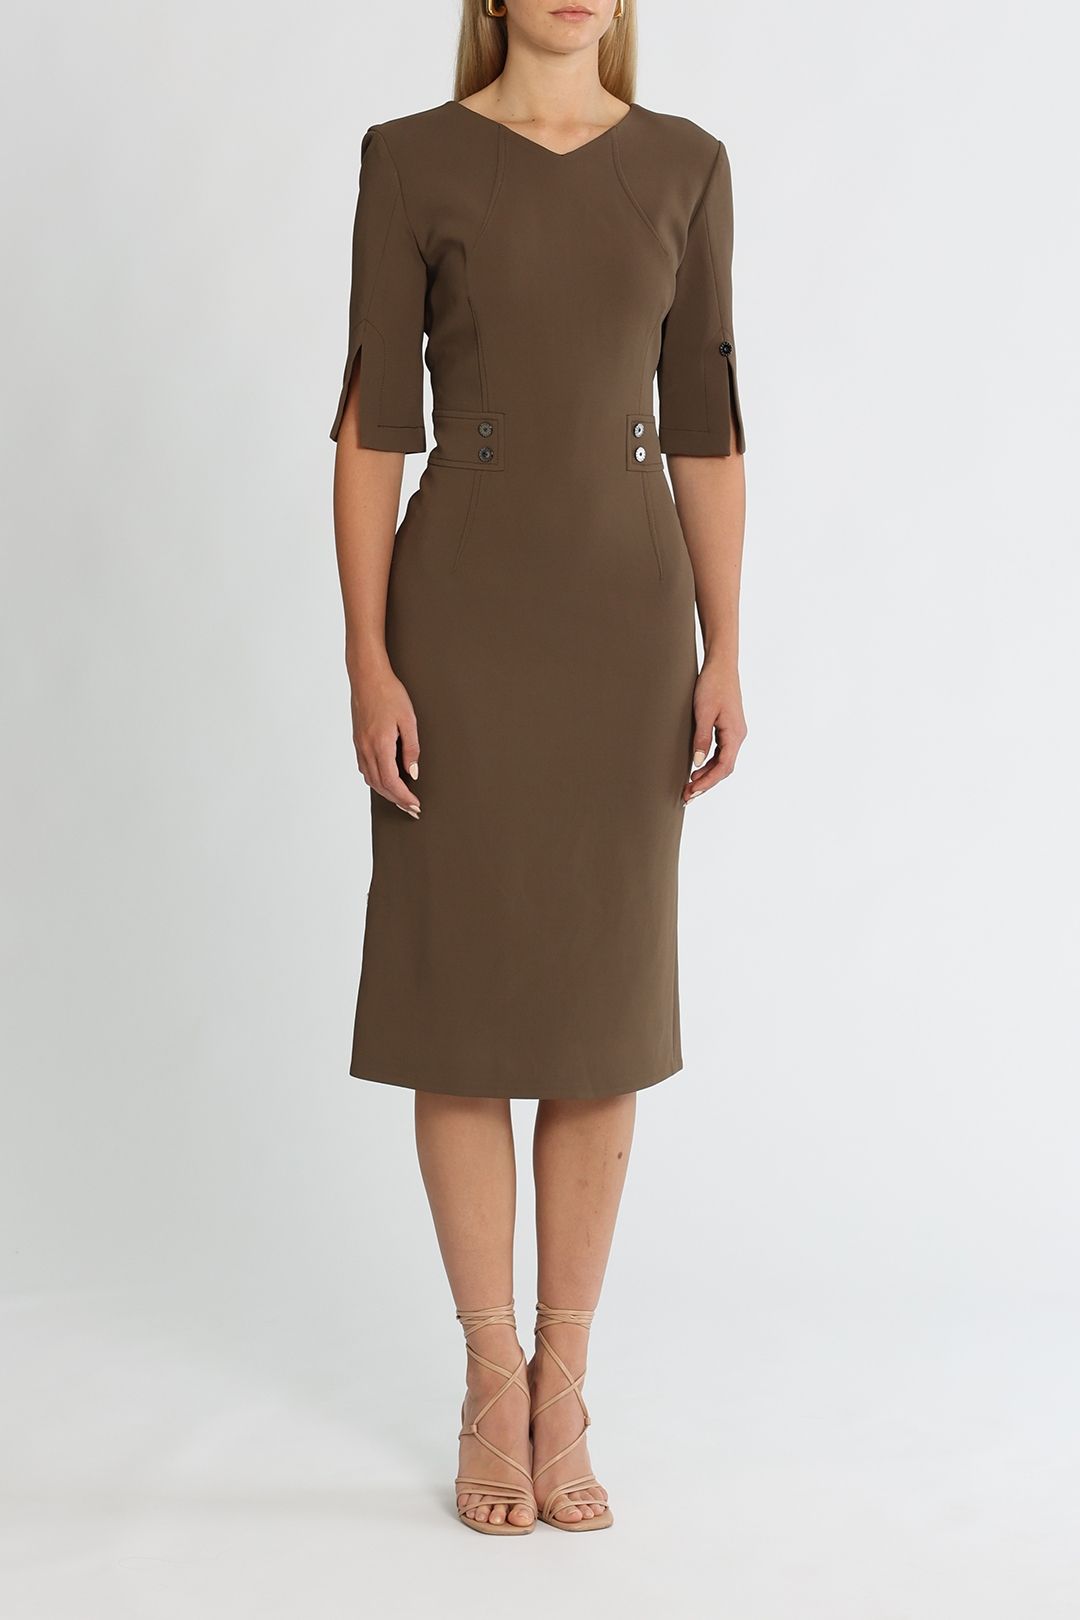 Ginger and Smart Structured Dress Tobacco Midi